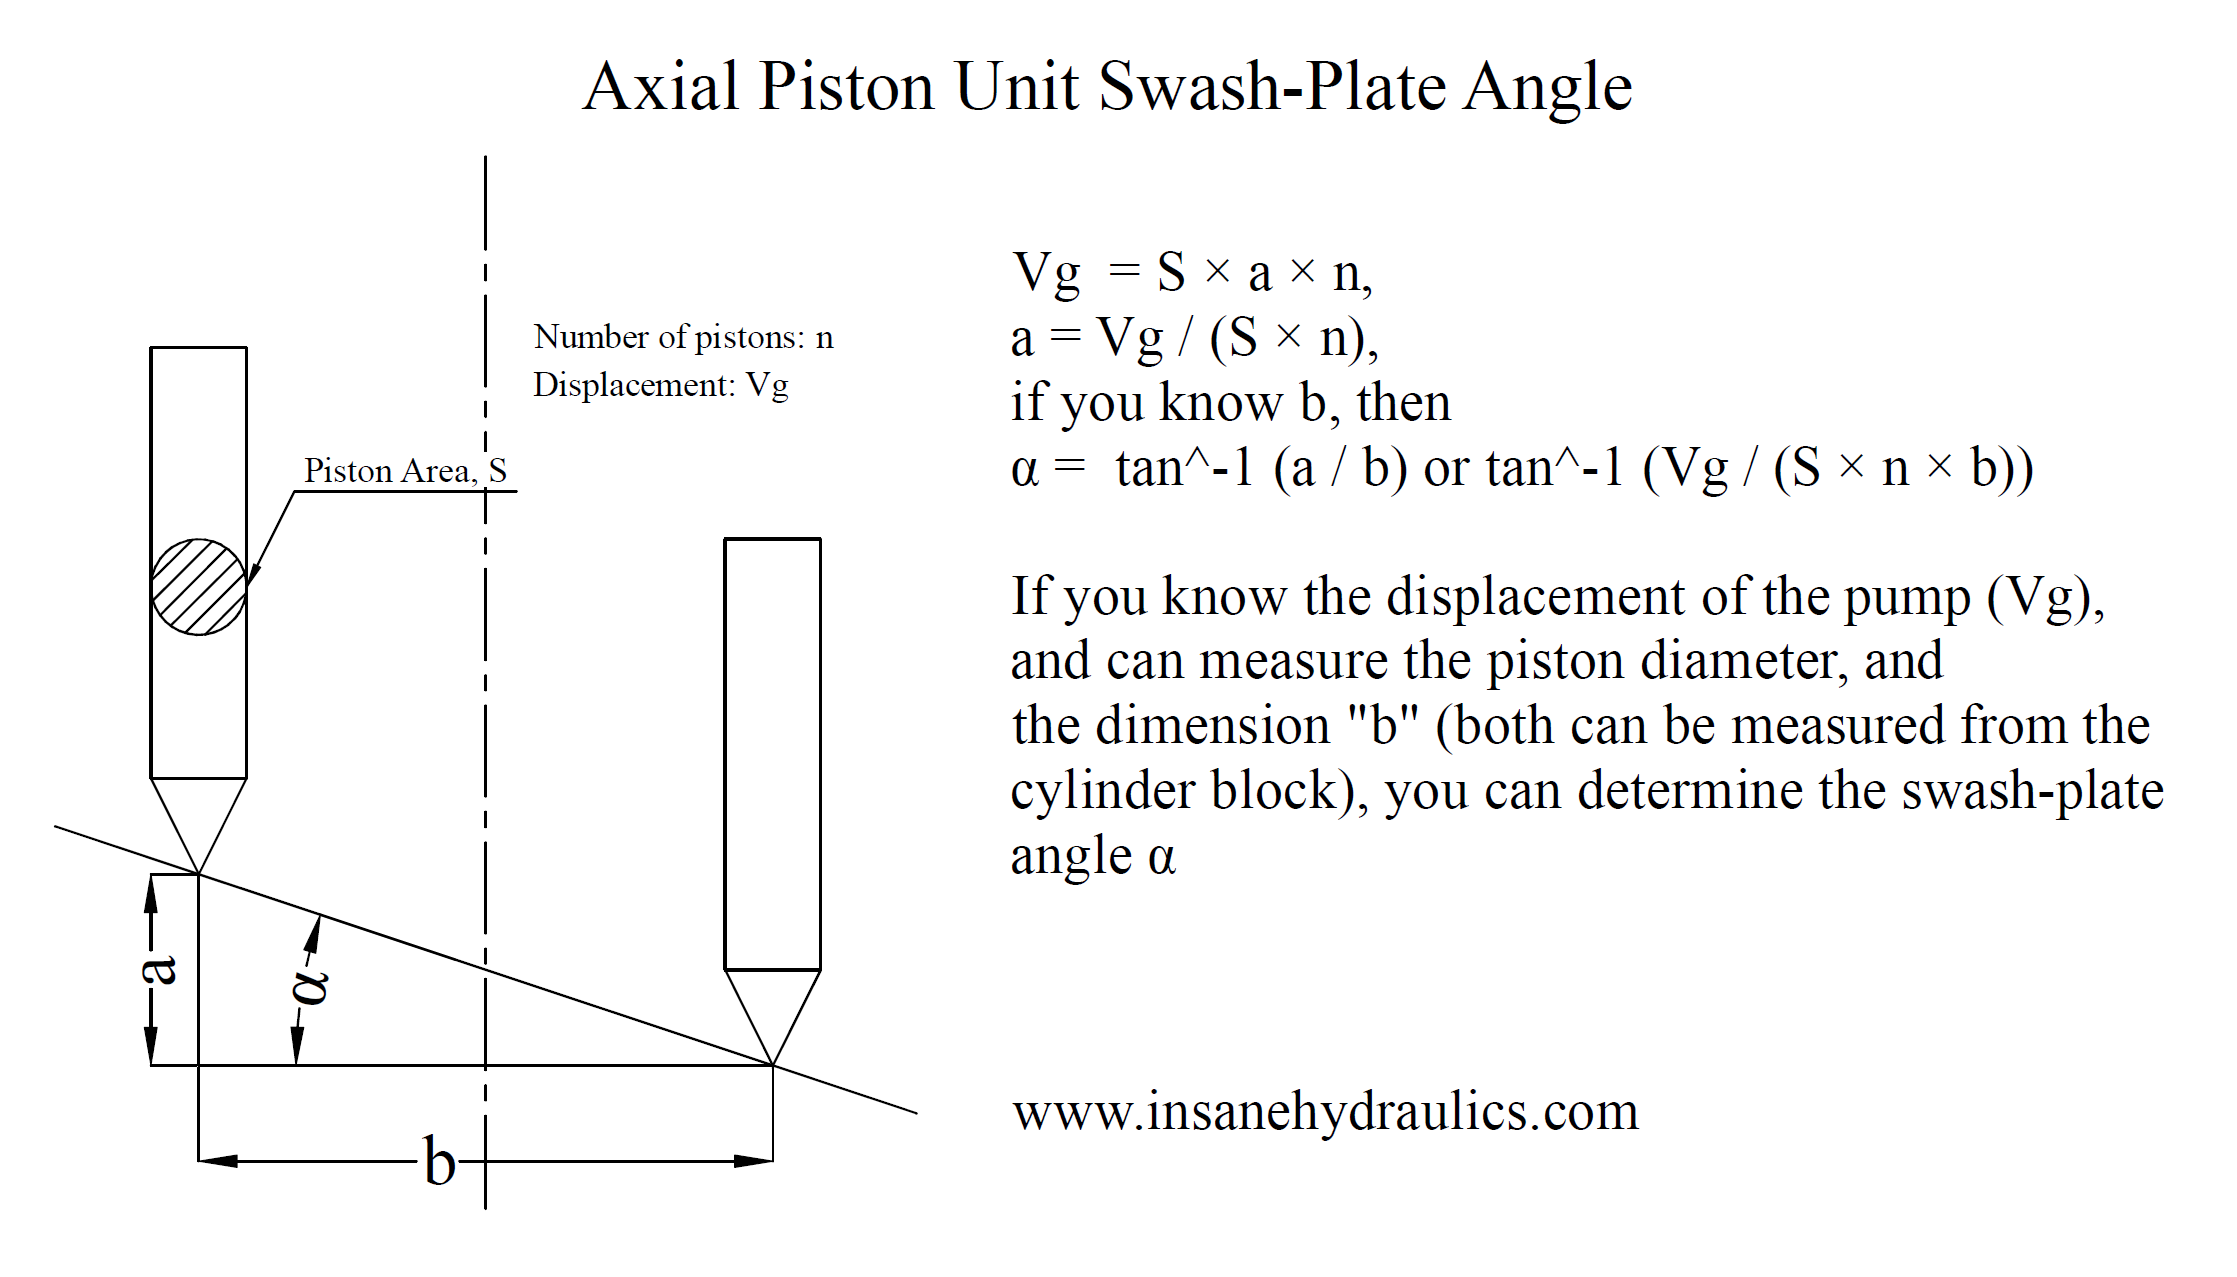 Calculating the Swash-Plate Angle of an Axial Piston Pump